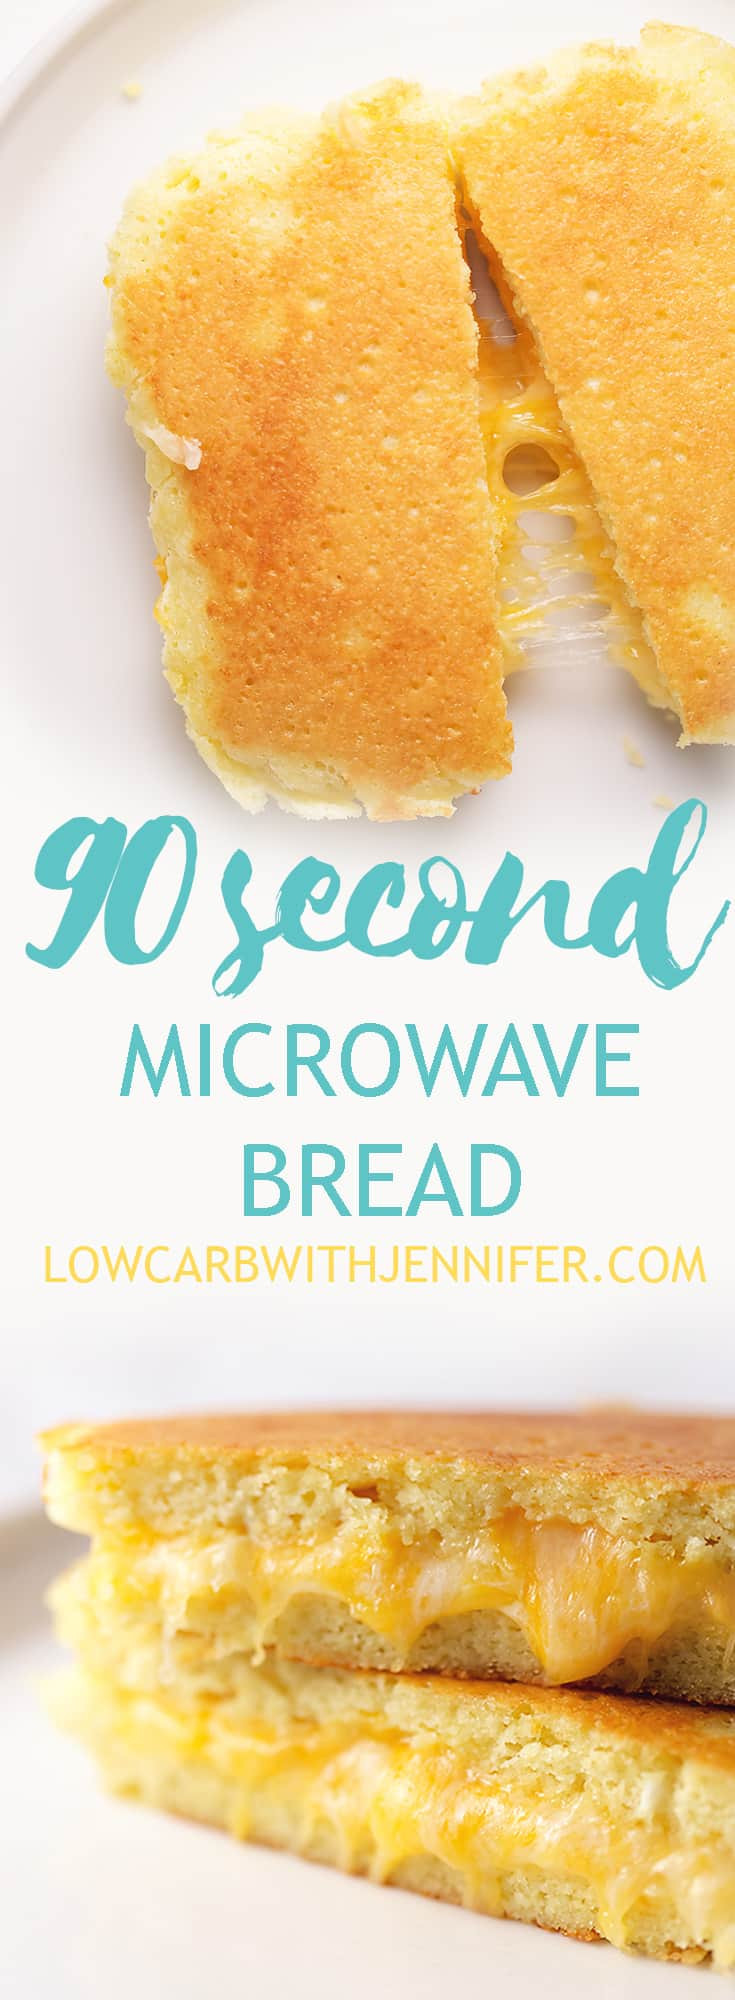 90 Second Keto Bread Coconut Flour
 90 Second Microwave Bread with Almond flour or Coconut